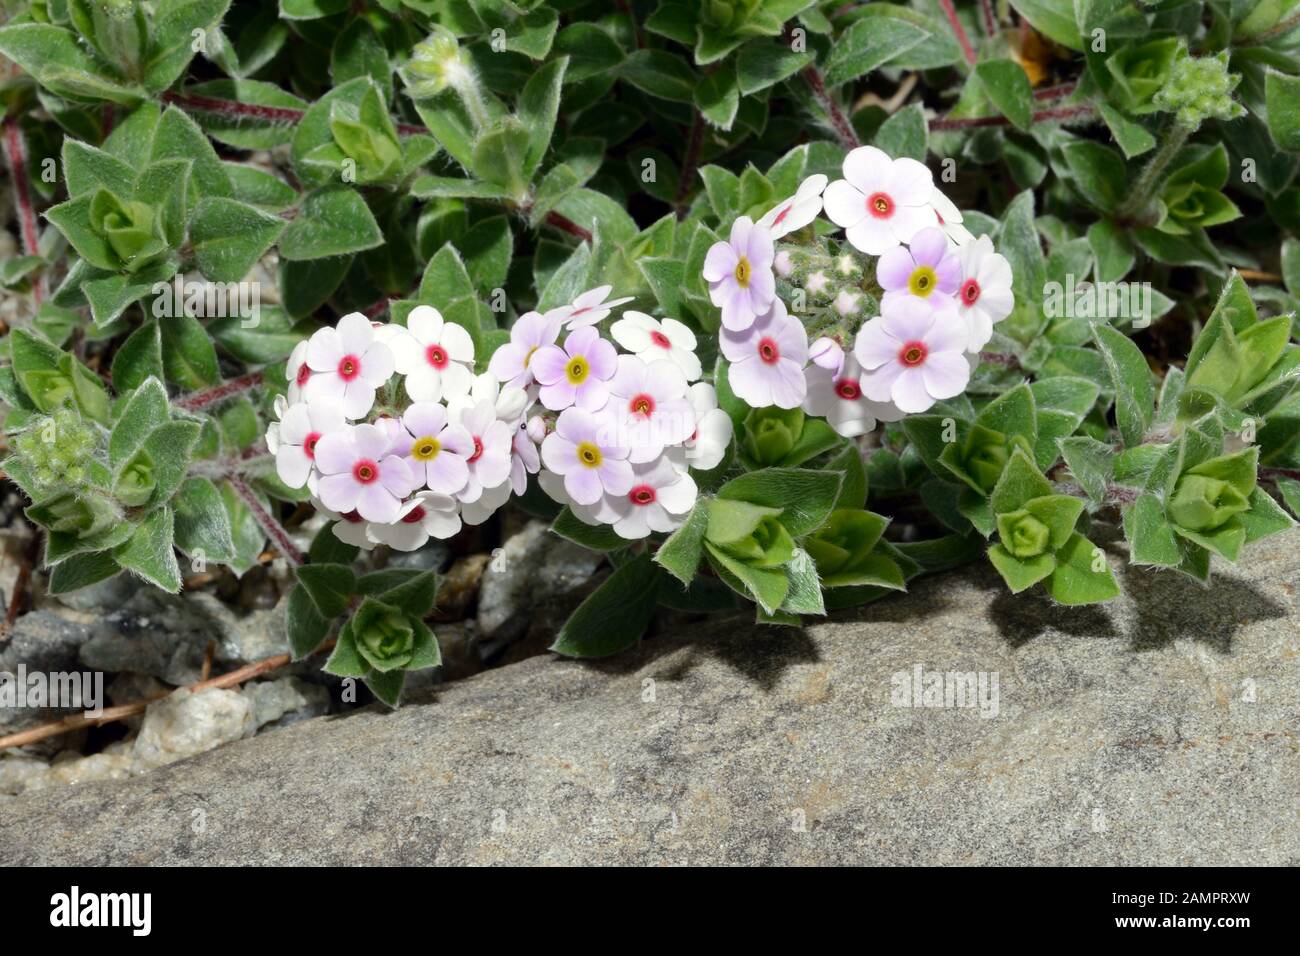 Androsace lanuginosa (woolly rock jasmine) is native to the Himalayas where it grows on grassy slopes up to 3000m. Stock Photo